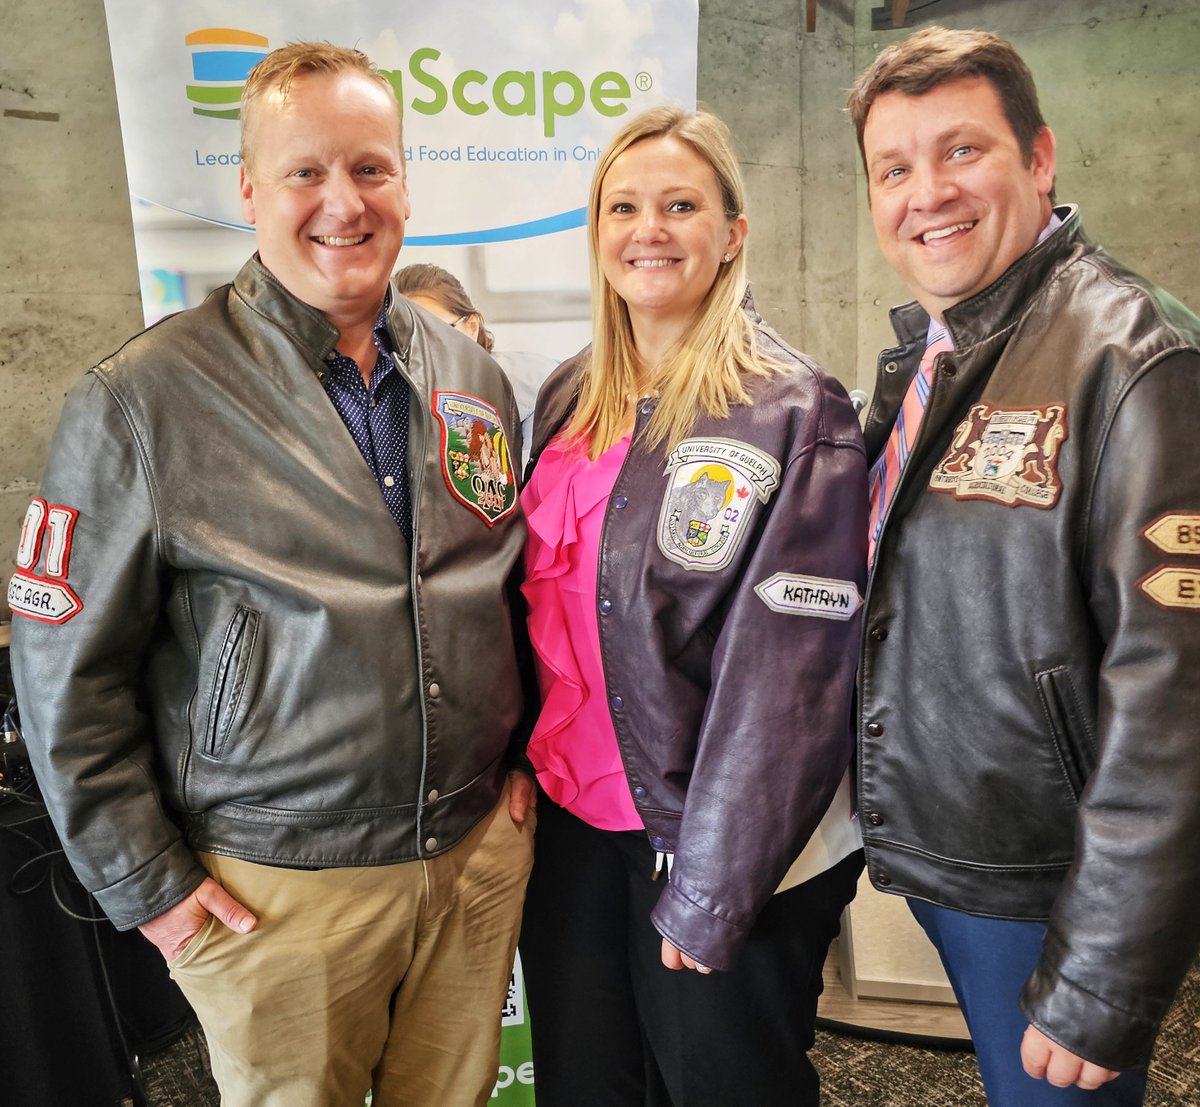 OAC Alumni Clair Doan, Katheryn Doan and Phil Emmott proudly donned their OAC jackets to show their Aggie pride @AgScapeON AGM May 1st to mark the 150 anniversary of U of G Ontario Agricultural College. #OAC150 #AgScapeAGM24 📸: Sharon Grose